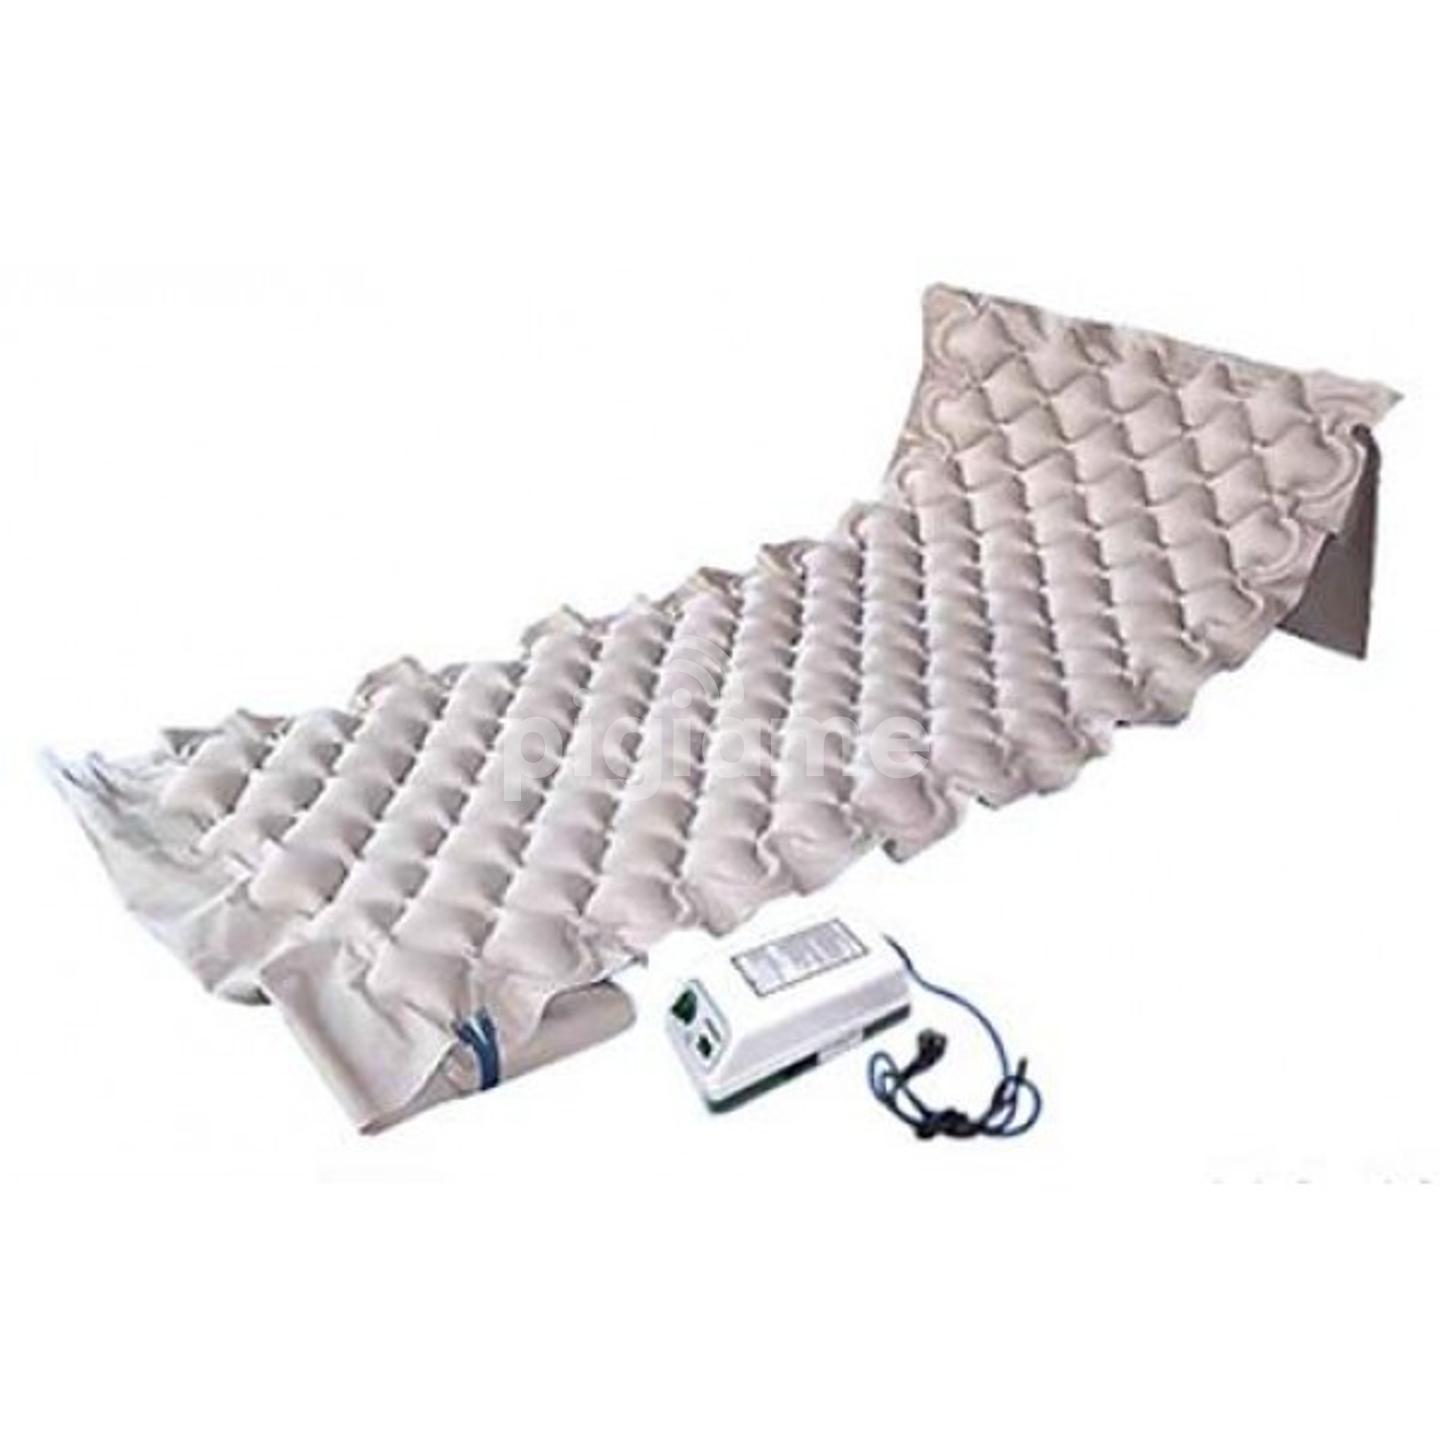 Inflatable hospital bed mattress